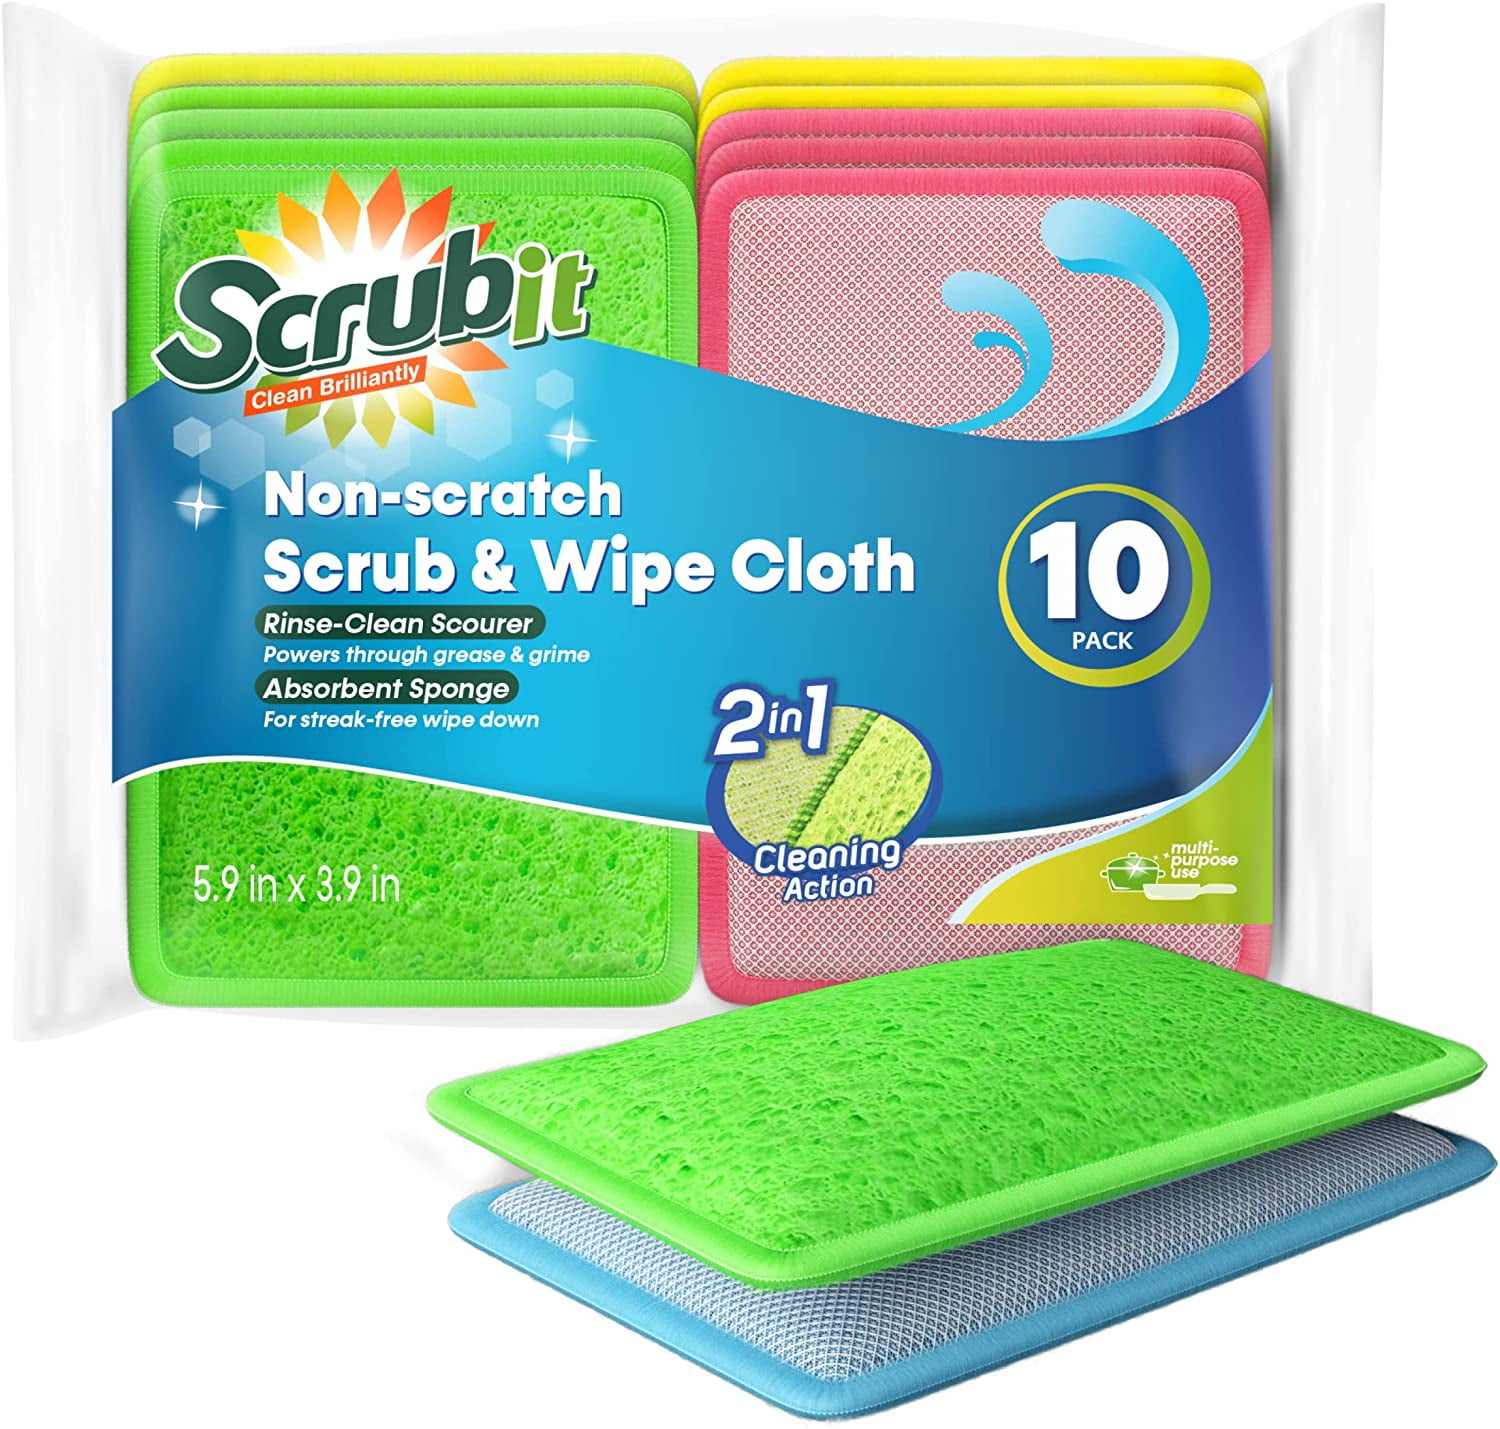 Lunatec Odor-Free Dishcloths. The Perfect Scrubber, Dish Cloth, Sponge and Scouring Pad to Clean Your Dishes, Pots & Pans, and Kitchen GEAR. Ideal